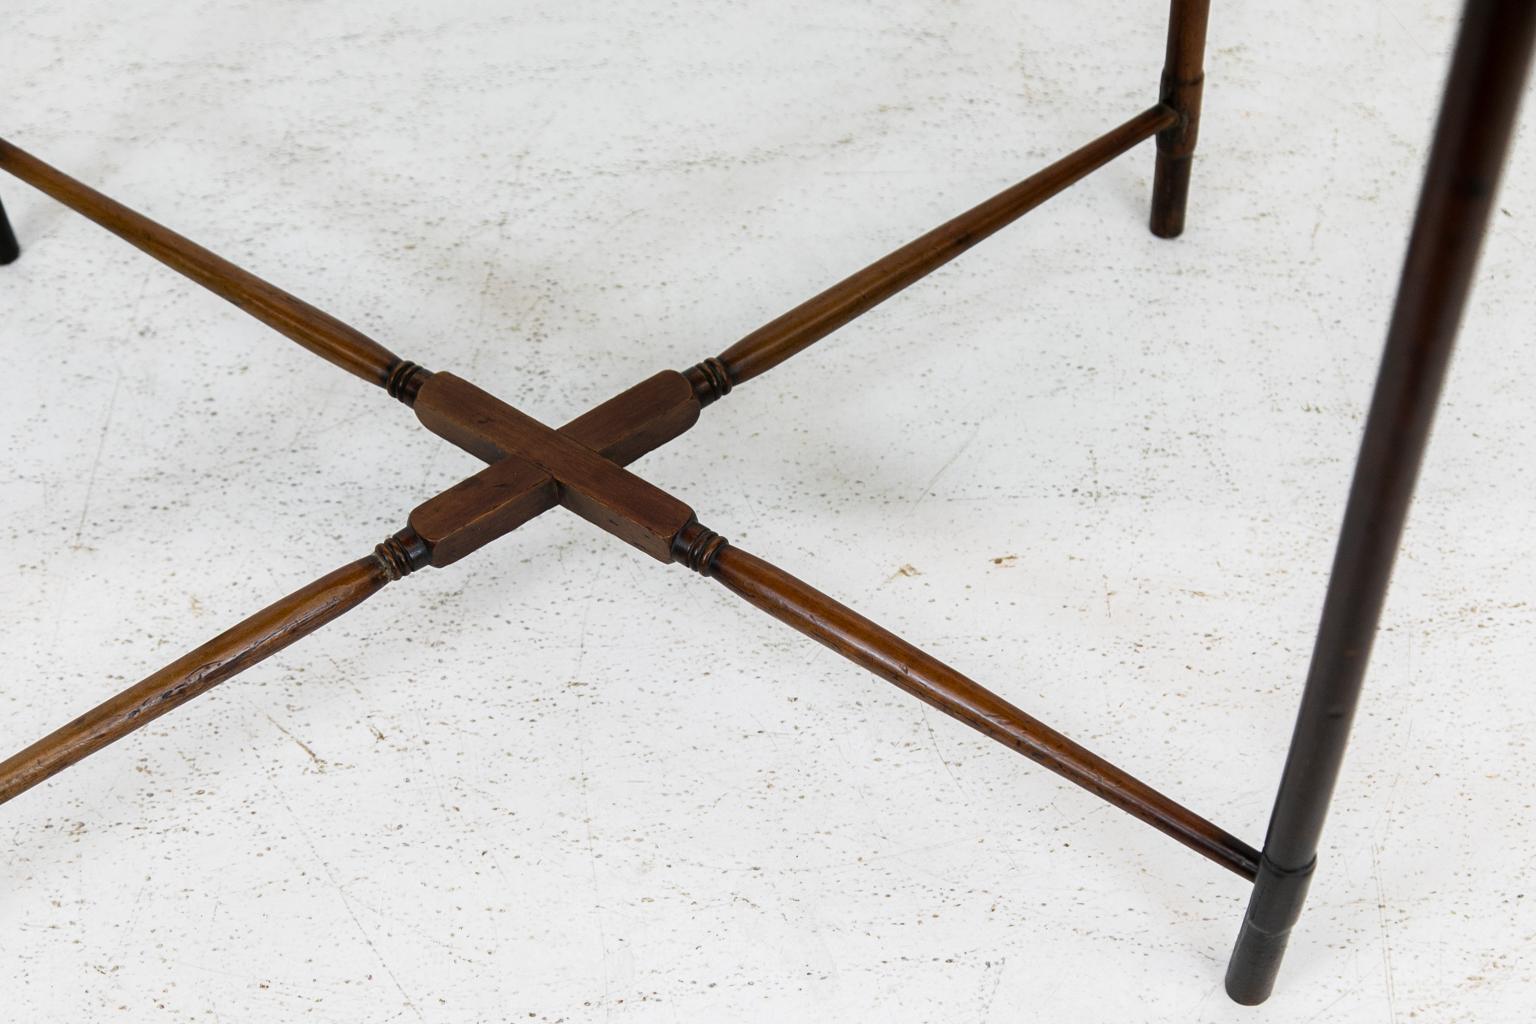 English mahogany spider leg table, has delicate turned legs that end at the top in lambs tongues. The base has a turned cross stretcher that braces the four legs.